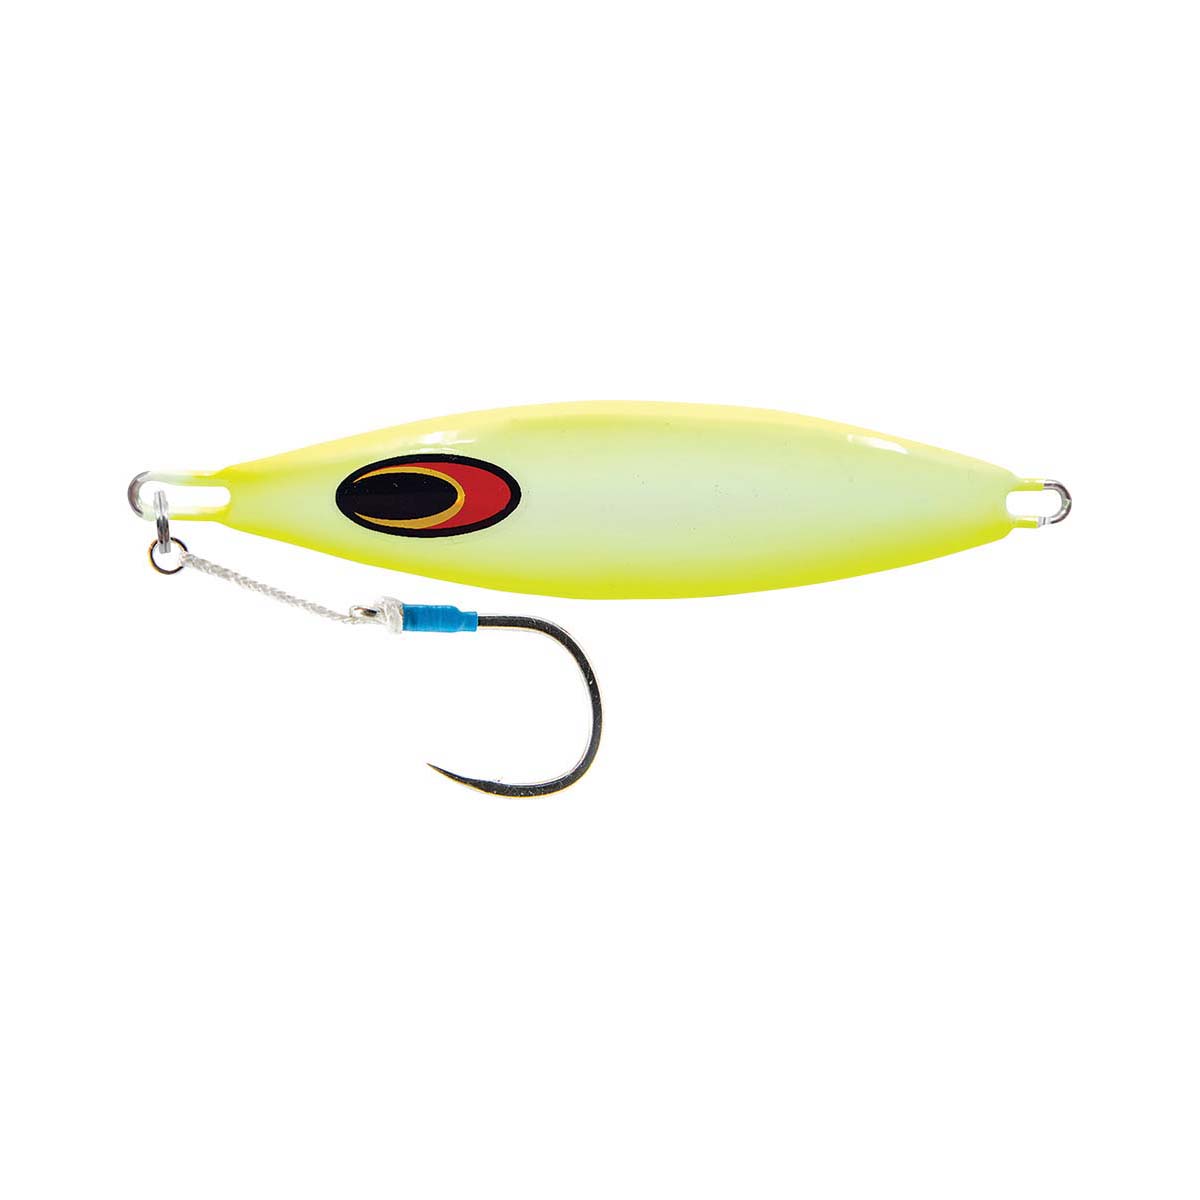 Nomad Buffalo Jig Lure 120g Chartreuse White Glow @ Club BCF